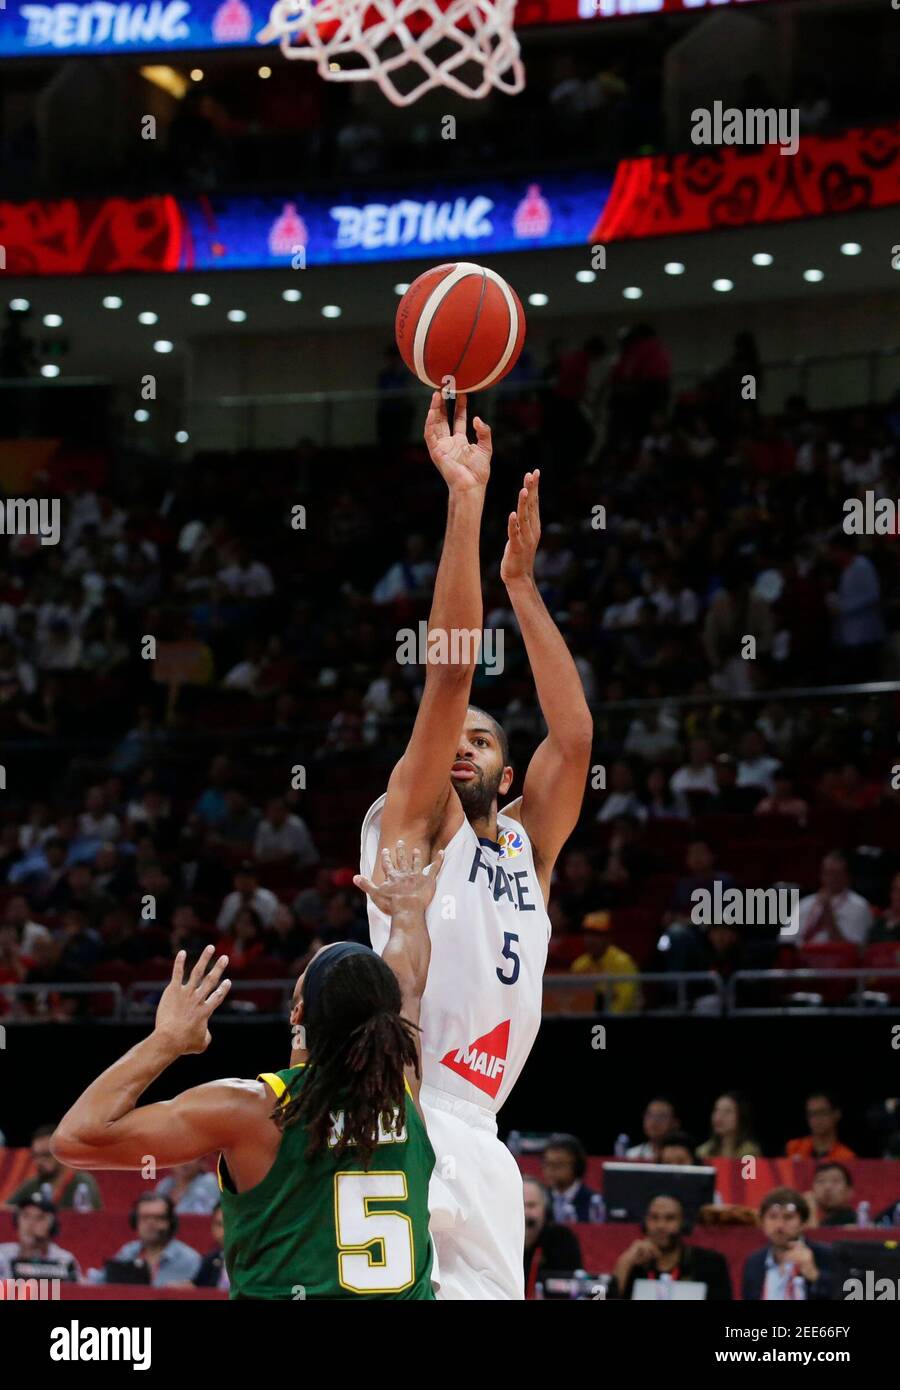 Basketball - FIBA World Cup - 3rd Place Game - France v Australia - Wukesong Sport Arena, Beijing, China - September 15, 2019  France's Nicolas Batum in action with Australia's Patty Mills REUTERS/Jason Lee Stock Photo